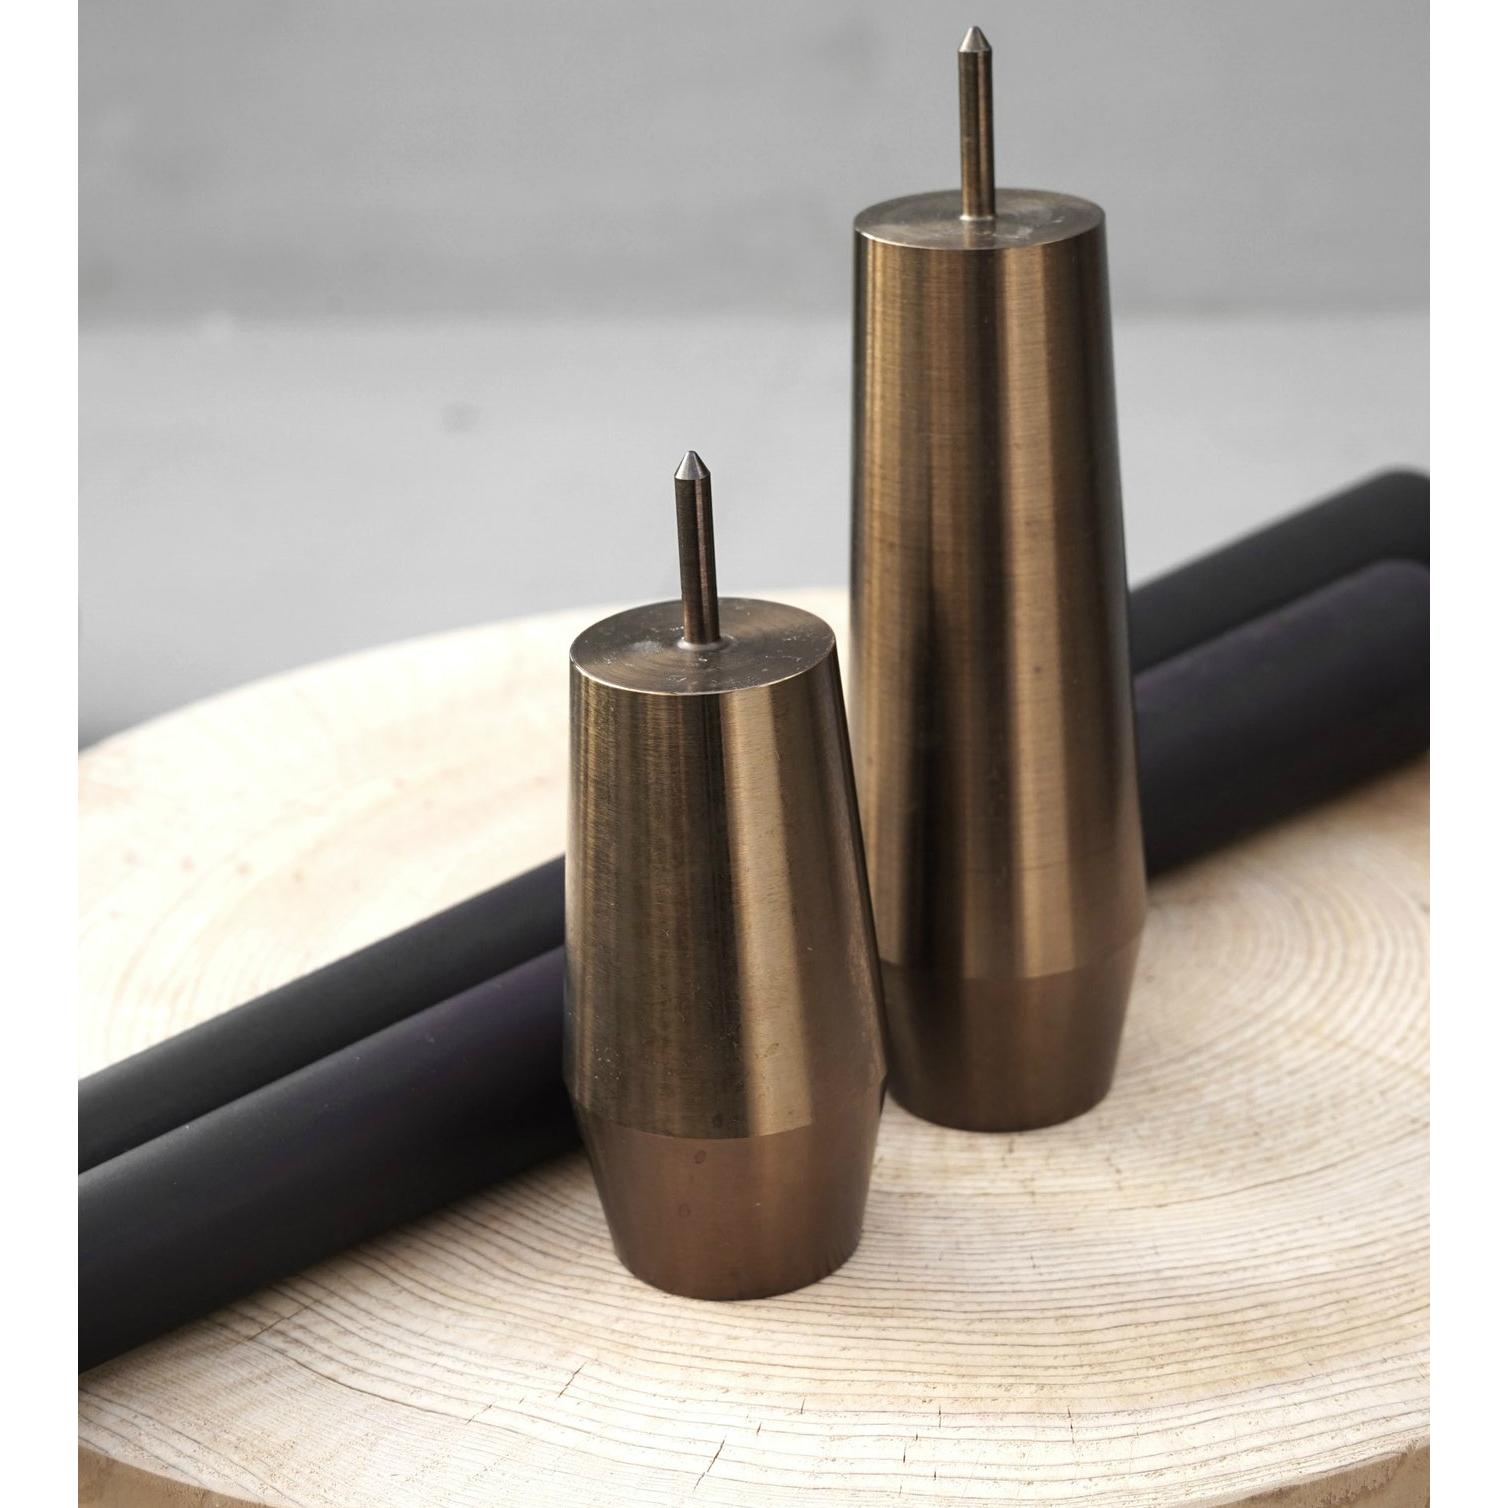 2 heat treated steel bases, with corresponding black 100% beeswax candles.

Barter Design hails from British Columbia. Their ethos is born from the belief that if we look to our natural environment we will find abundance in materials and natures